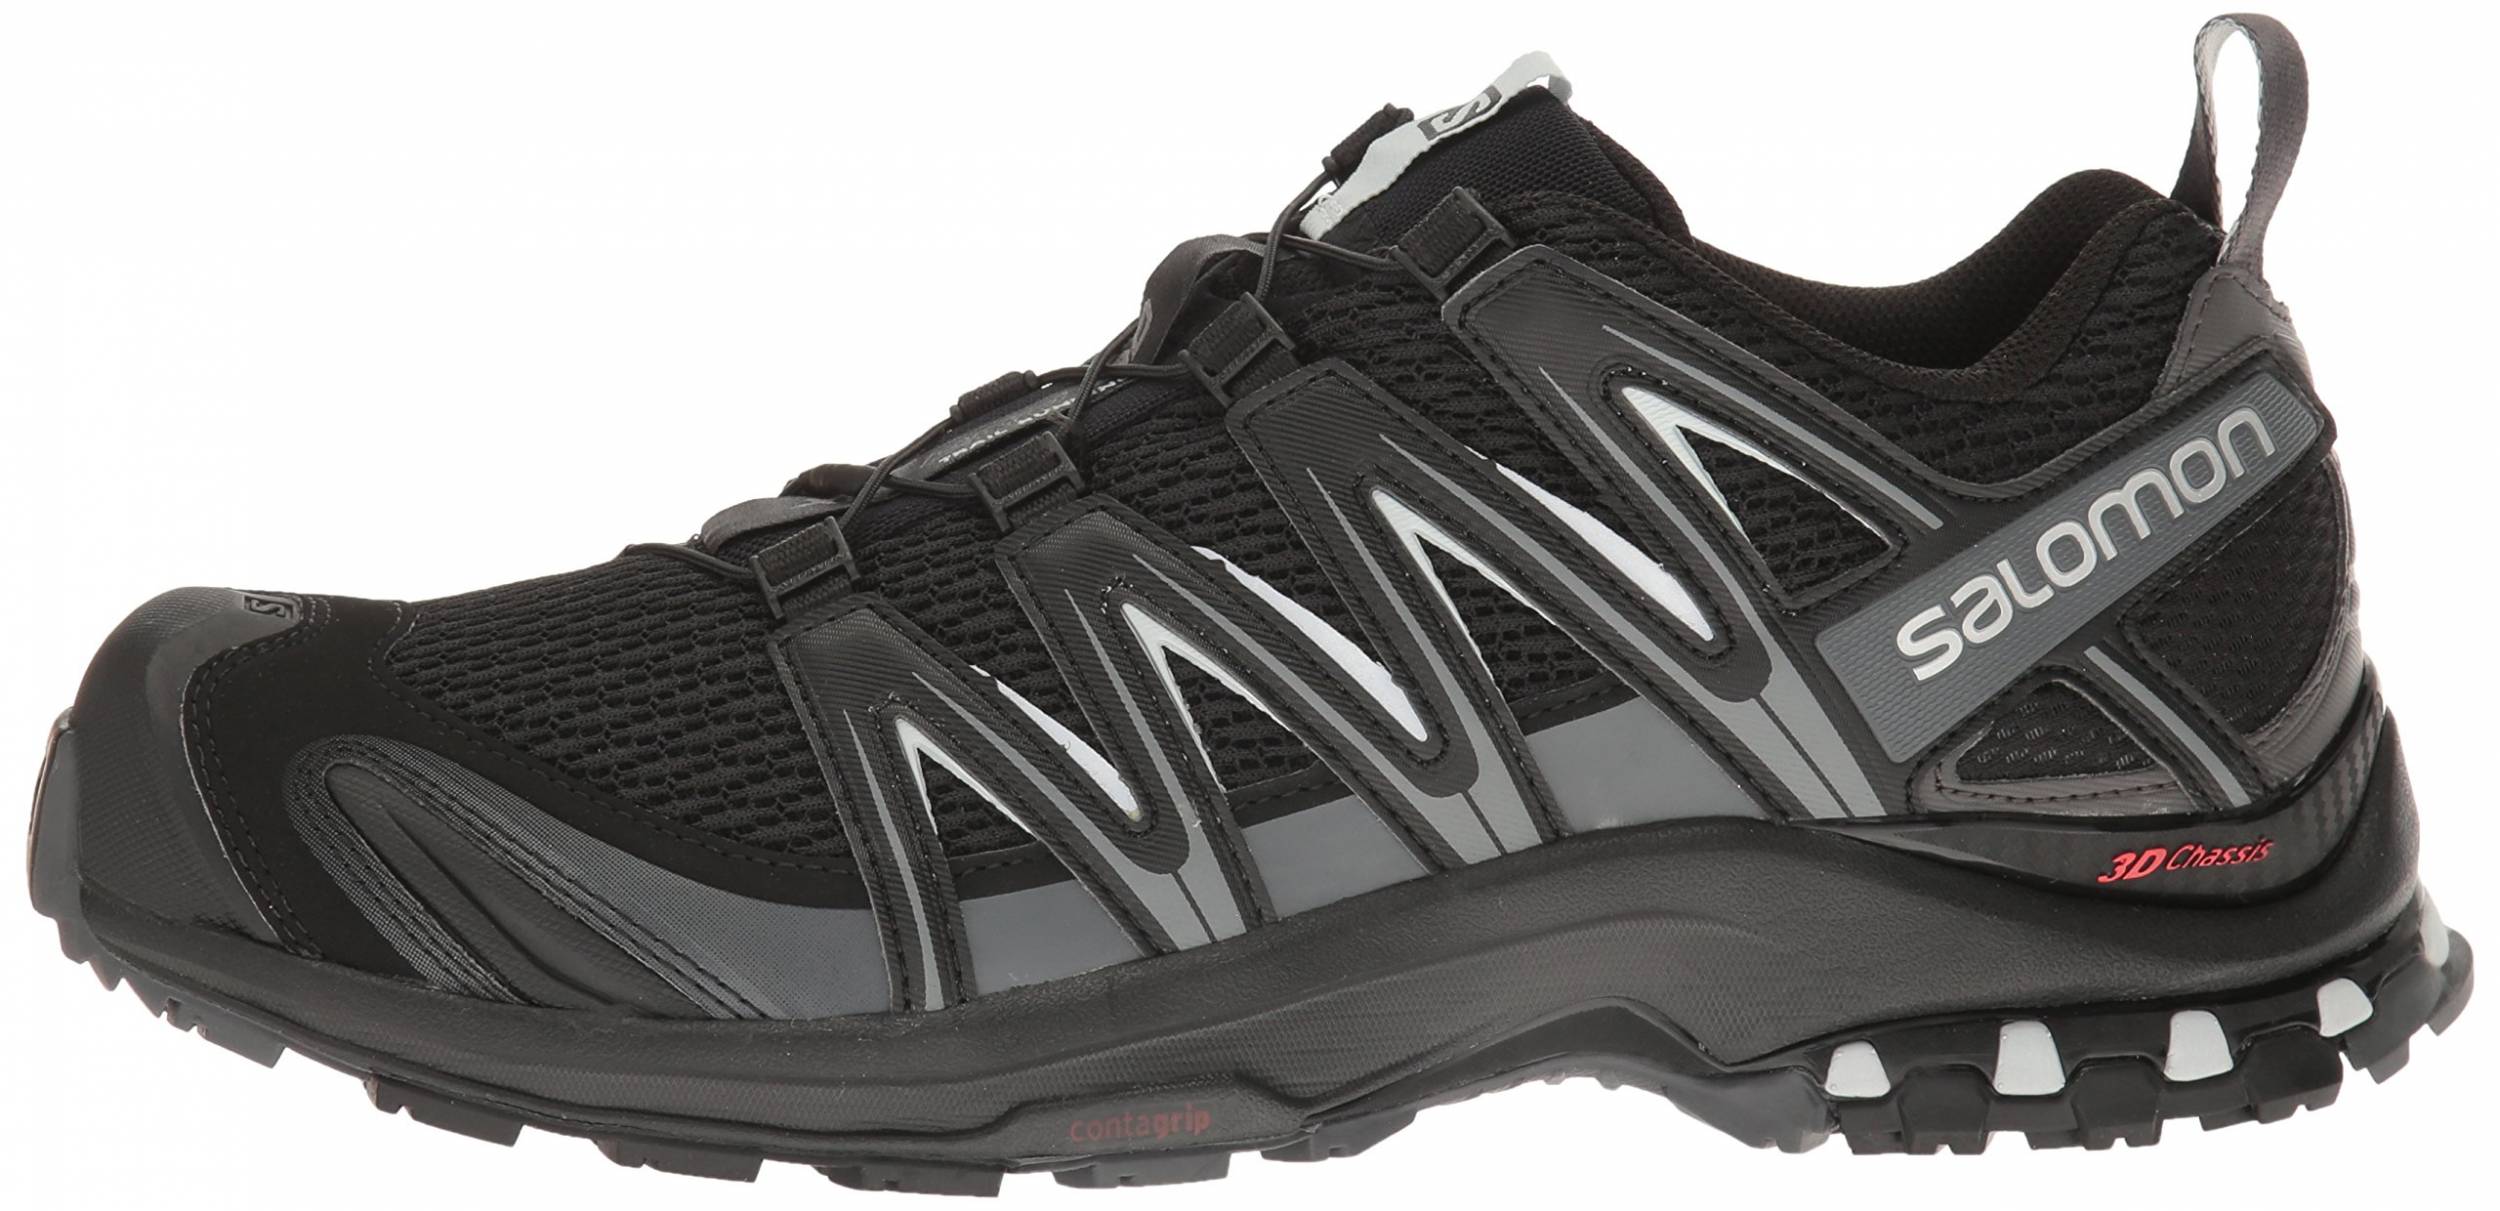 Only $65 + Review of Salomon XA Pro 3D 